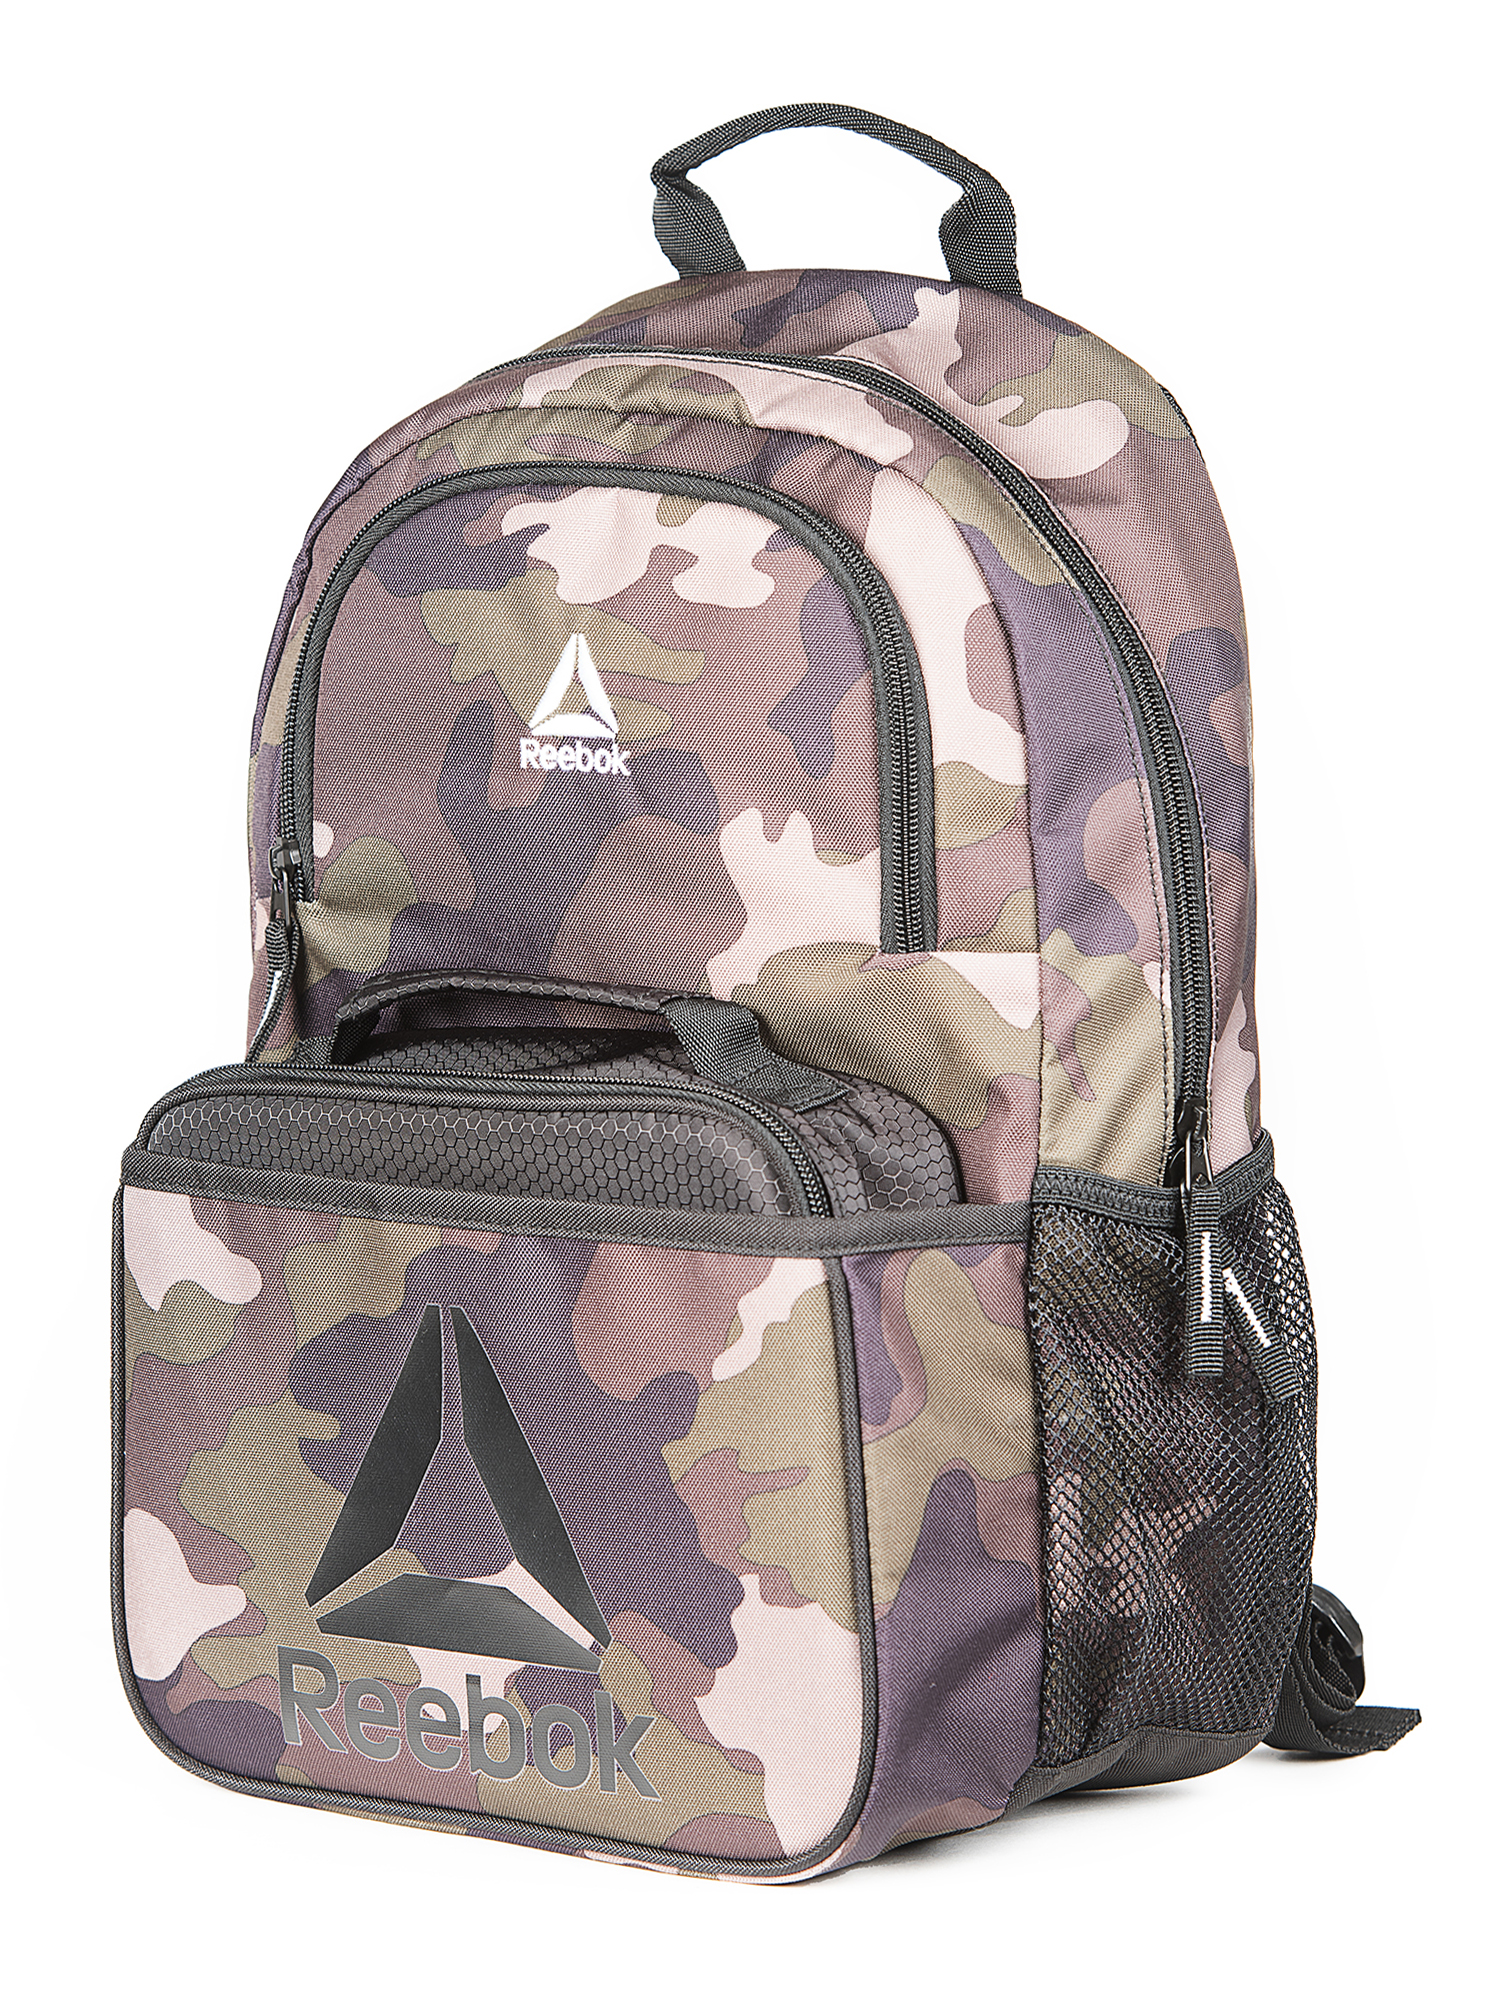 Reebok Unisex Riley Backpack with Lunch Box - Army Camo - image 3 of 4